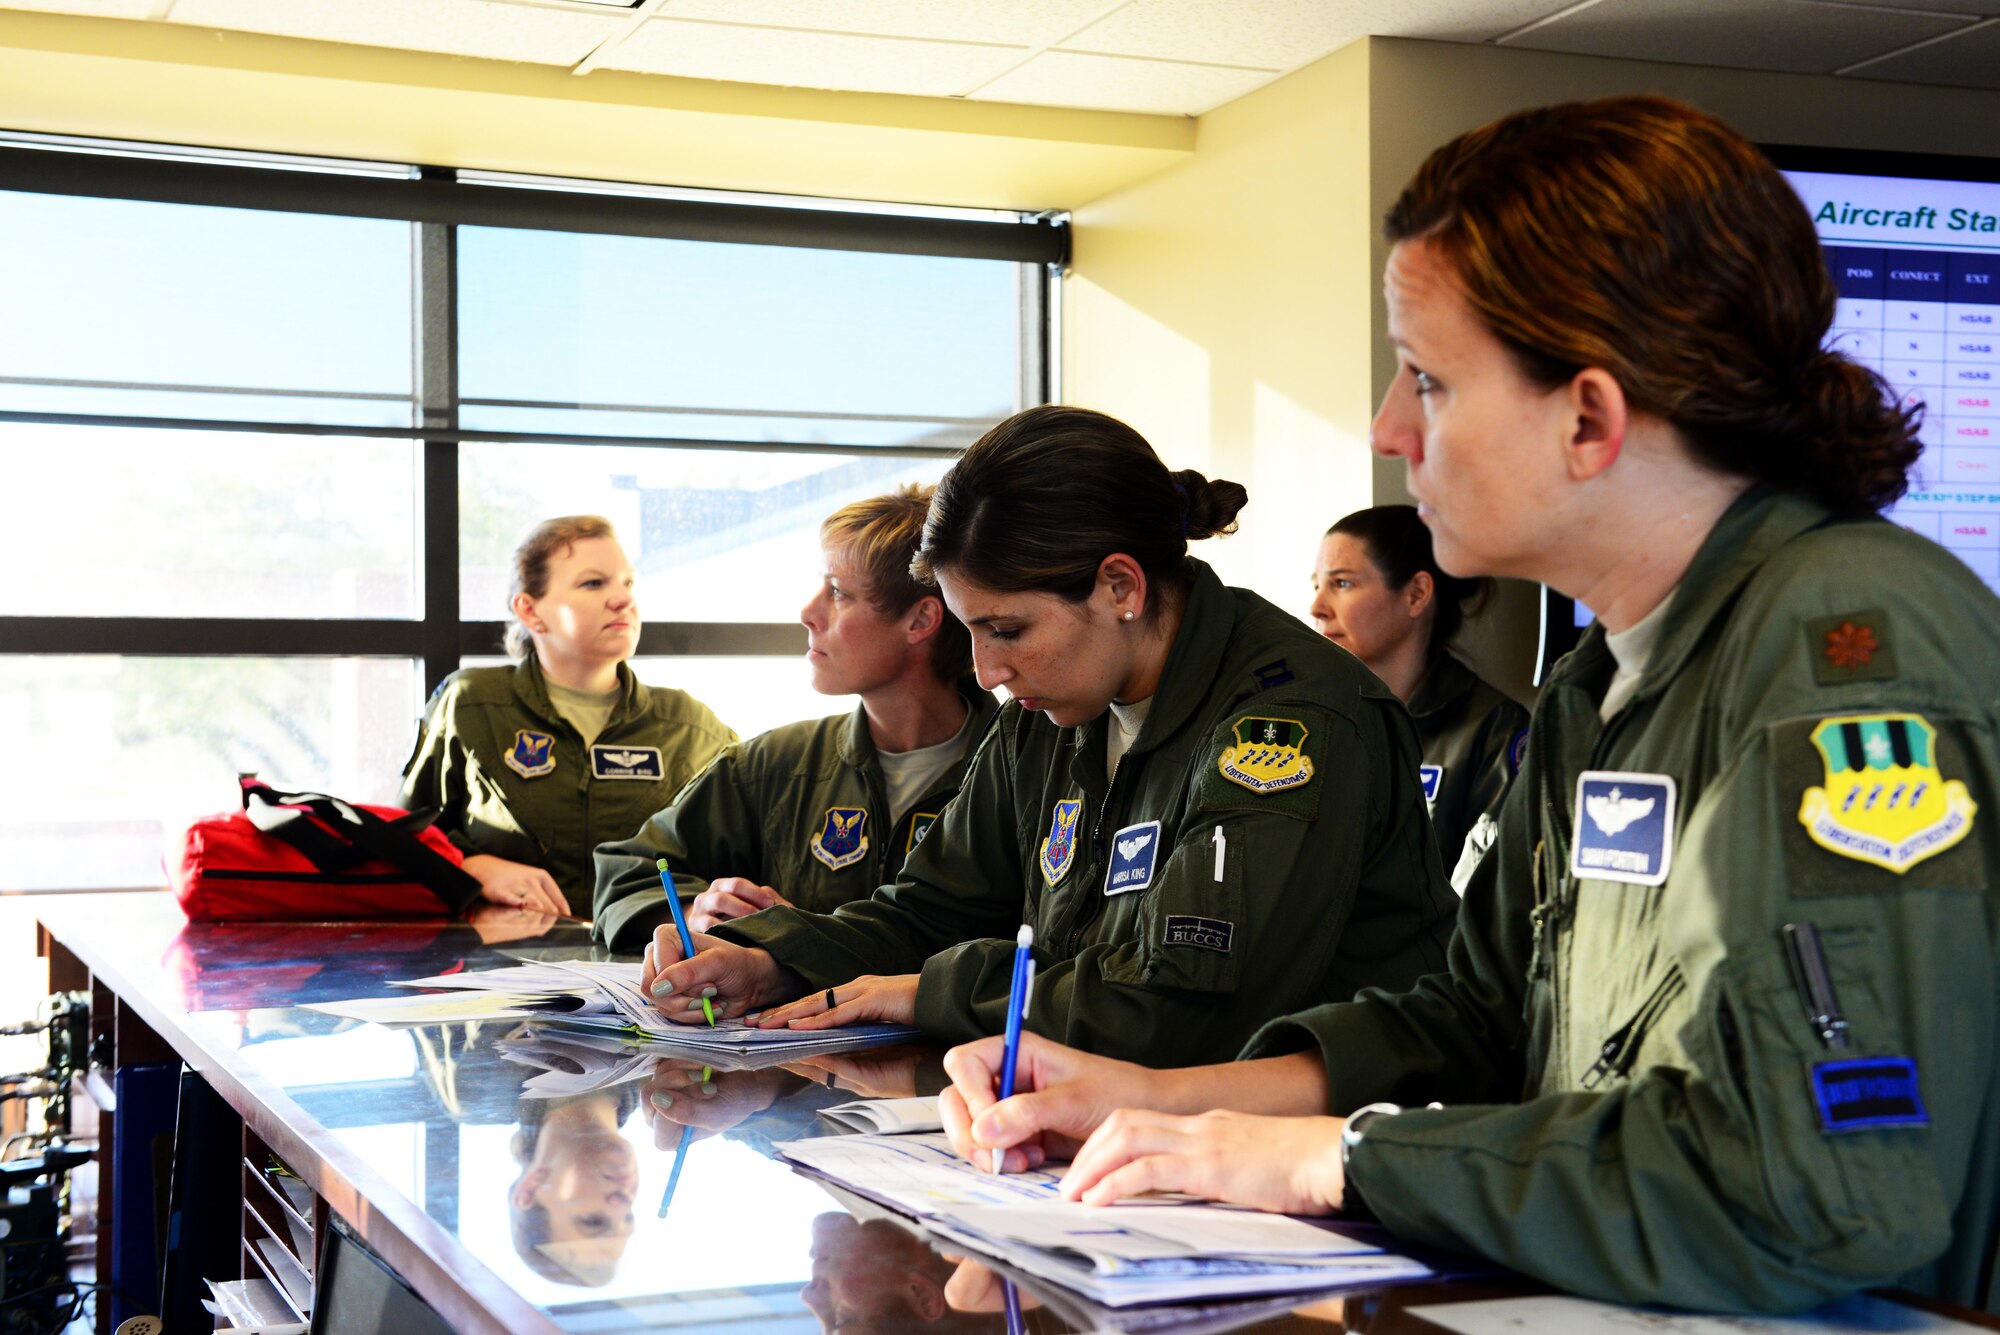 An all-female aircrew is briefed before their flight at Barksdale Air Force Base, La., March 22, 2016. To celebrate women’s history month, two all-female aircrews were assembled to make U.S. Air Force history by being the first all-female aircrew to fly a B-52 Stratofortress. (U.S. Air Force photo/Airman 1st Class Luke Hill)